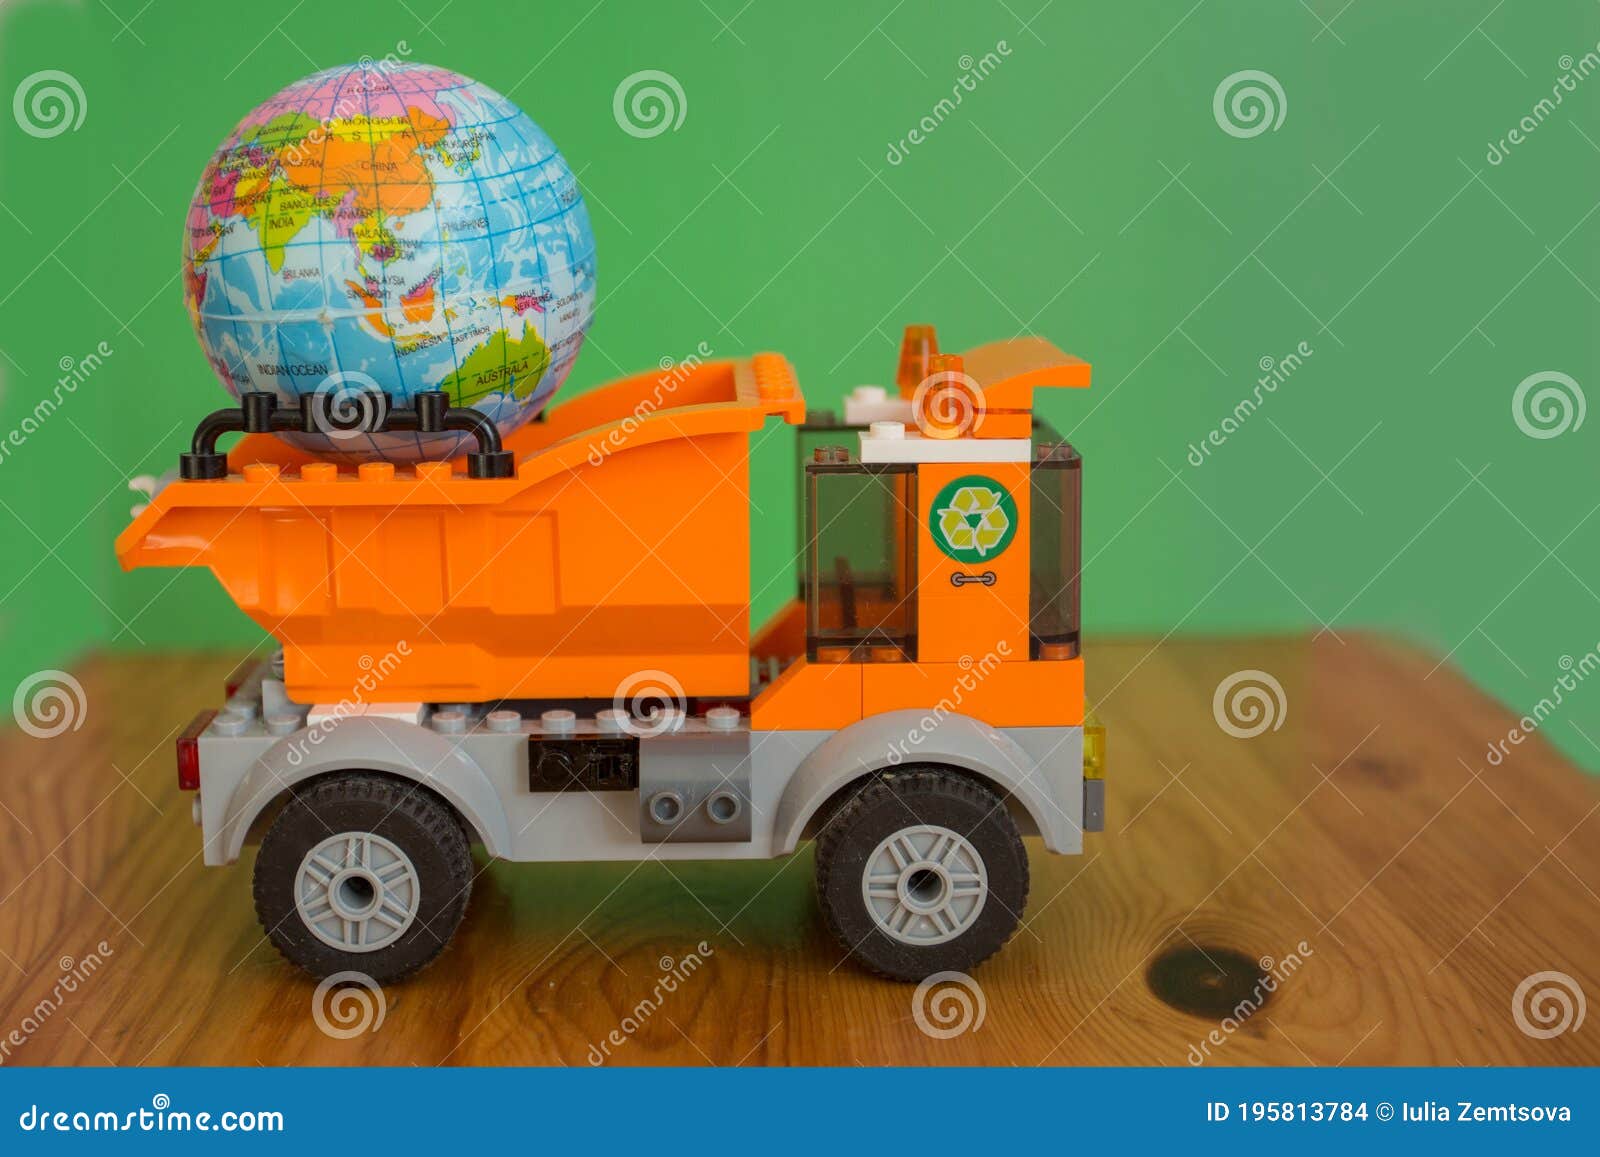 little globe in garbage truck. eco concept.